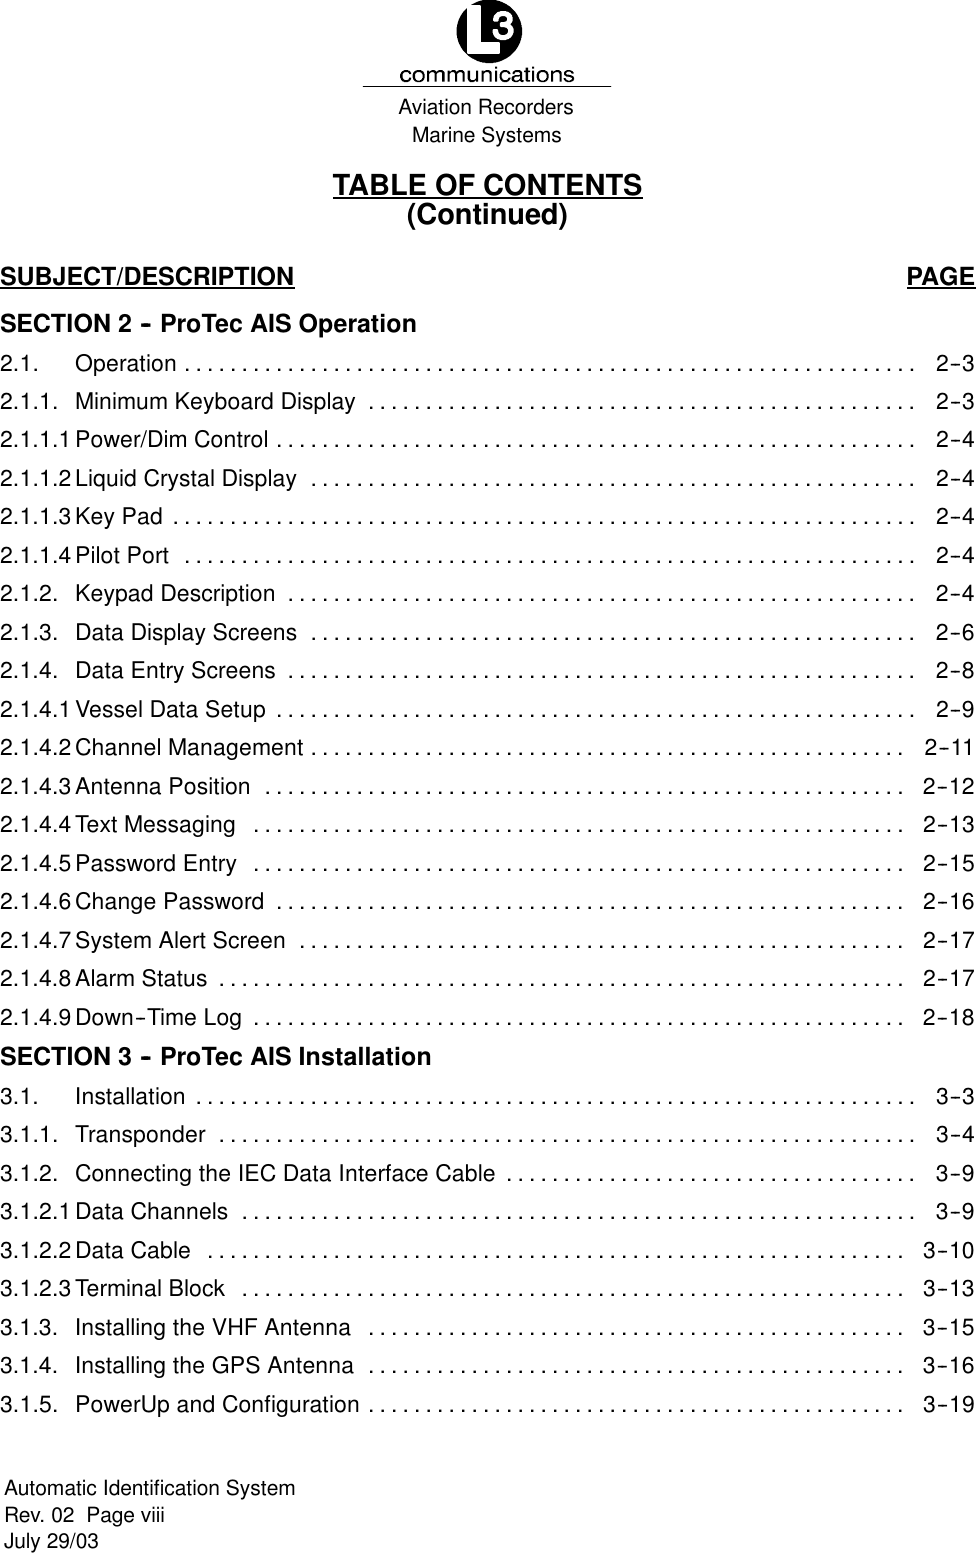 Marine SystemsAviation RecordersRev. 02 Page viiiJuly 29/03Automatic Identification SystemTABLE OF CONTENTS(Continued)SUBJECT/DESCRIPTION PAGESECTION 2 -- ProTec AIS Operation2.1. Operation 2--3................................................................2.1.1. Minimum Keyboard Display 2--3................................................2.1.1.1Power/Dim Control 2--4........................................................2.1.1.2Liquid Crystal Display 2--4.....................................................2.1.1.3Key Pad 2--4.................................................................2.1.1.4Pilot Port 2--4................................................................2.1.2. Keypad Description 2--4.......................................................2.1.3. Data Display Screens 2--6.....................................................2.1.4. Data Entry Screens 2--8.......................................................2.1.4.1Vessel Data Setup 2--9........................................................2.1.4.2Channel Management 2--11....................................................2.1.4.3Antenna Position 2--12........................................................2.1.4.4Text Messaging 2--13.........................................................2.1.4.5Password Entry 2--15.........................................................2.1.4.6Change Password 2--16.......................................................2.1.4.7System Alert Screen 2--17.....................................................2.1.4.8Alarm Status 2--17............................................................2.1.4.9Down--Time Log 2--18.........................................................SECTION 3 -- ProTec AIS Installation3.1. Installation 3--3...............................................................3.1.1. Transponder 3--4.............................................................3.1.2. Connecting the IEC Data Interface Cable 3--9....................................3.1.2.1Data Channels 3--9...........................................................3.1.2.2Data Cable 3--10.............................................................3.1.2.3Terminal Block 3--13..........................................................3.1.3. Installing the VHF Antenna 3--15...............................................3.1.4. Installing the GPS Antenna 3--16...............................................3.1.5. PowerUp and Configuration 3--19...............................................